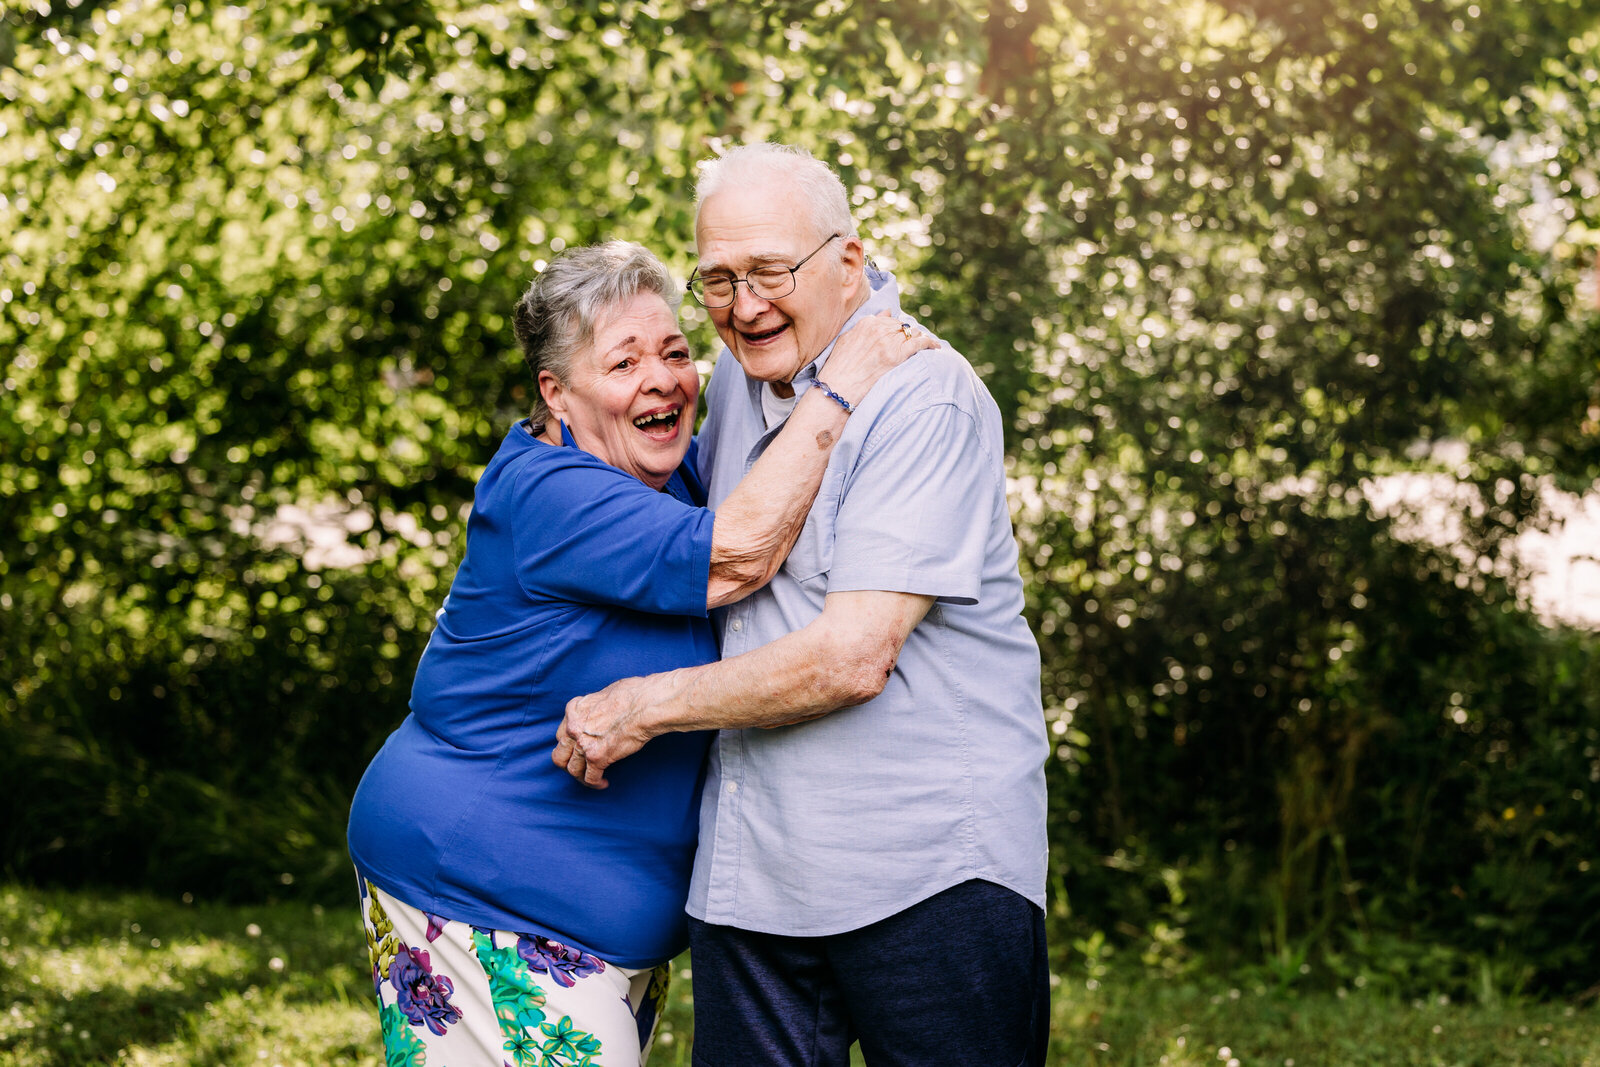 An elderly couple hold each other close while laughing together